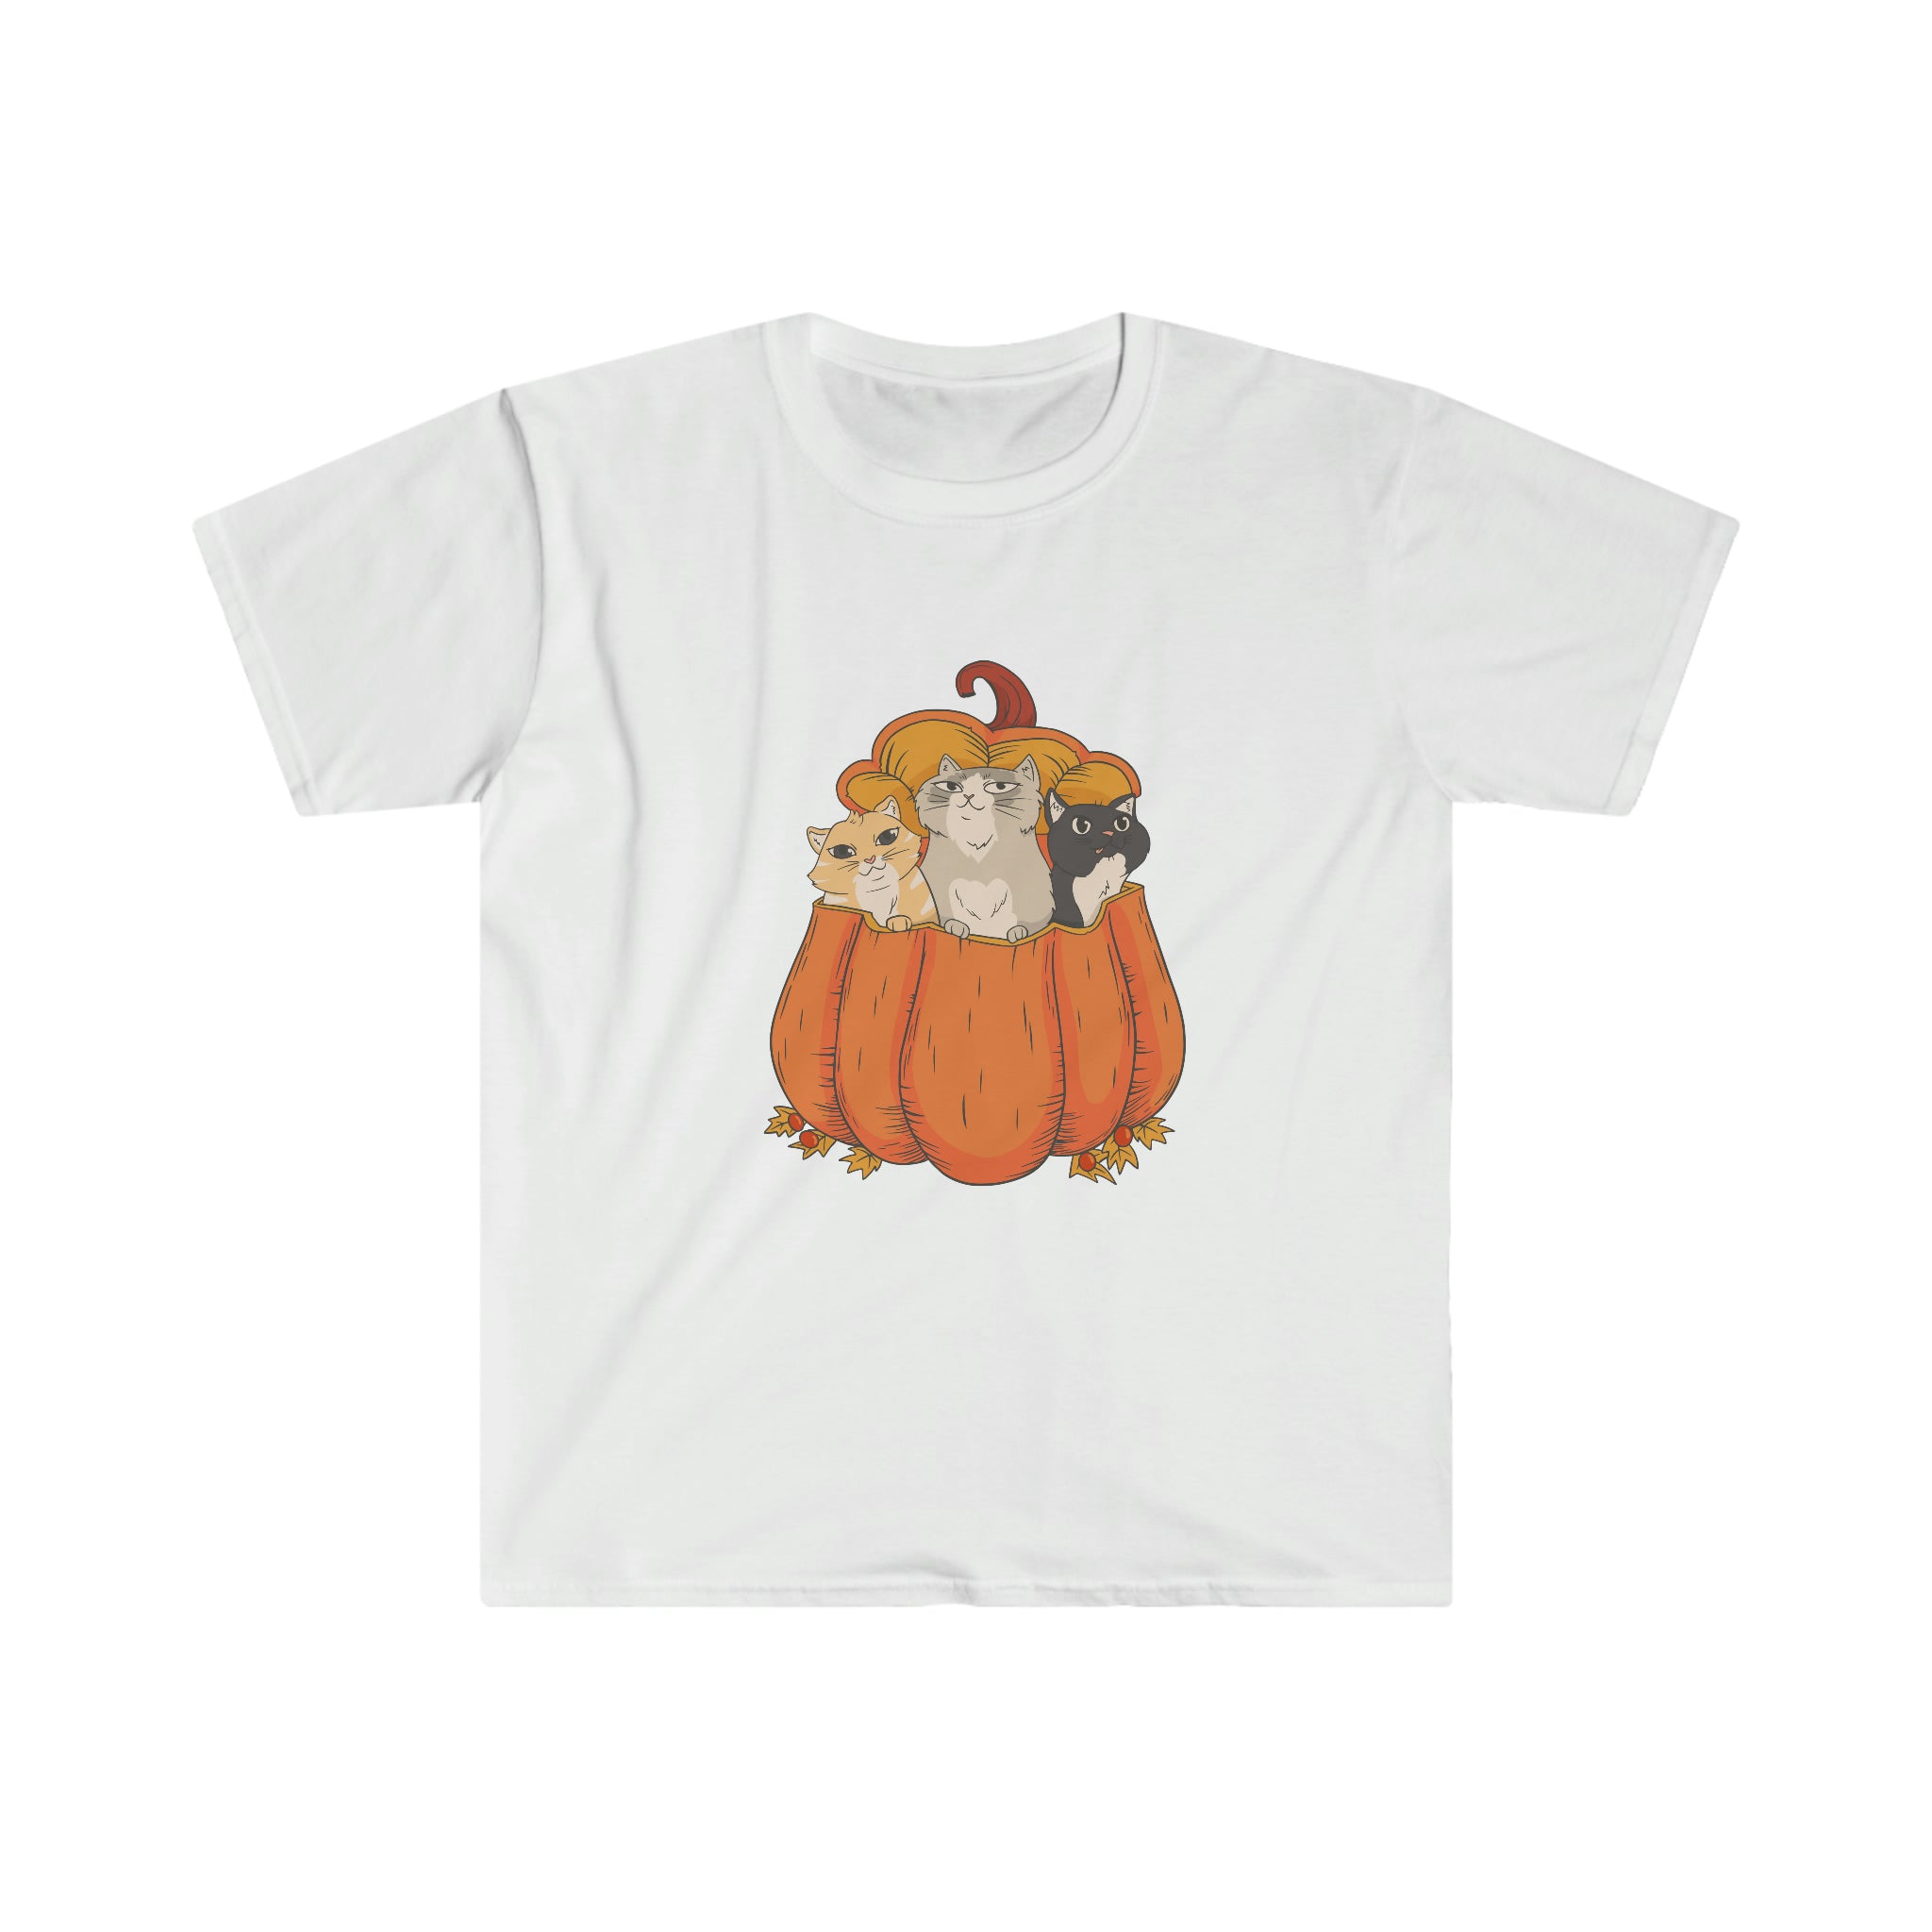 A Halloween Cats t-shirt with cartoon cats on it.